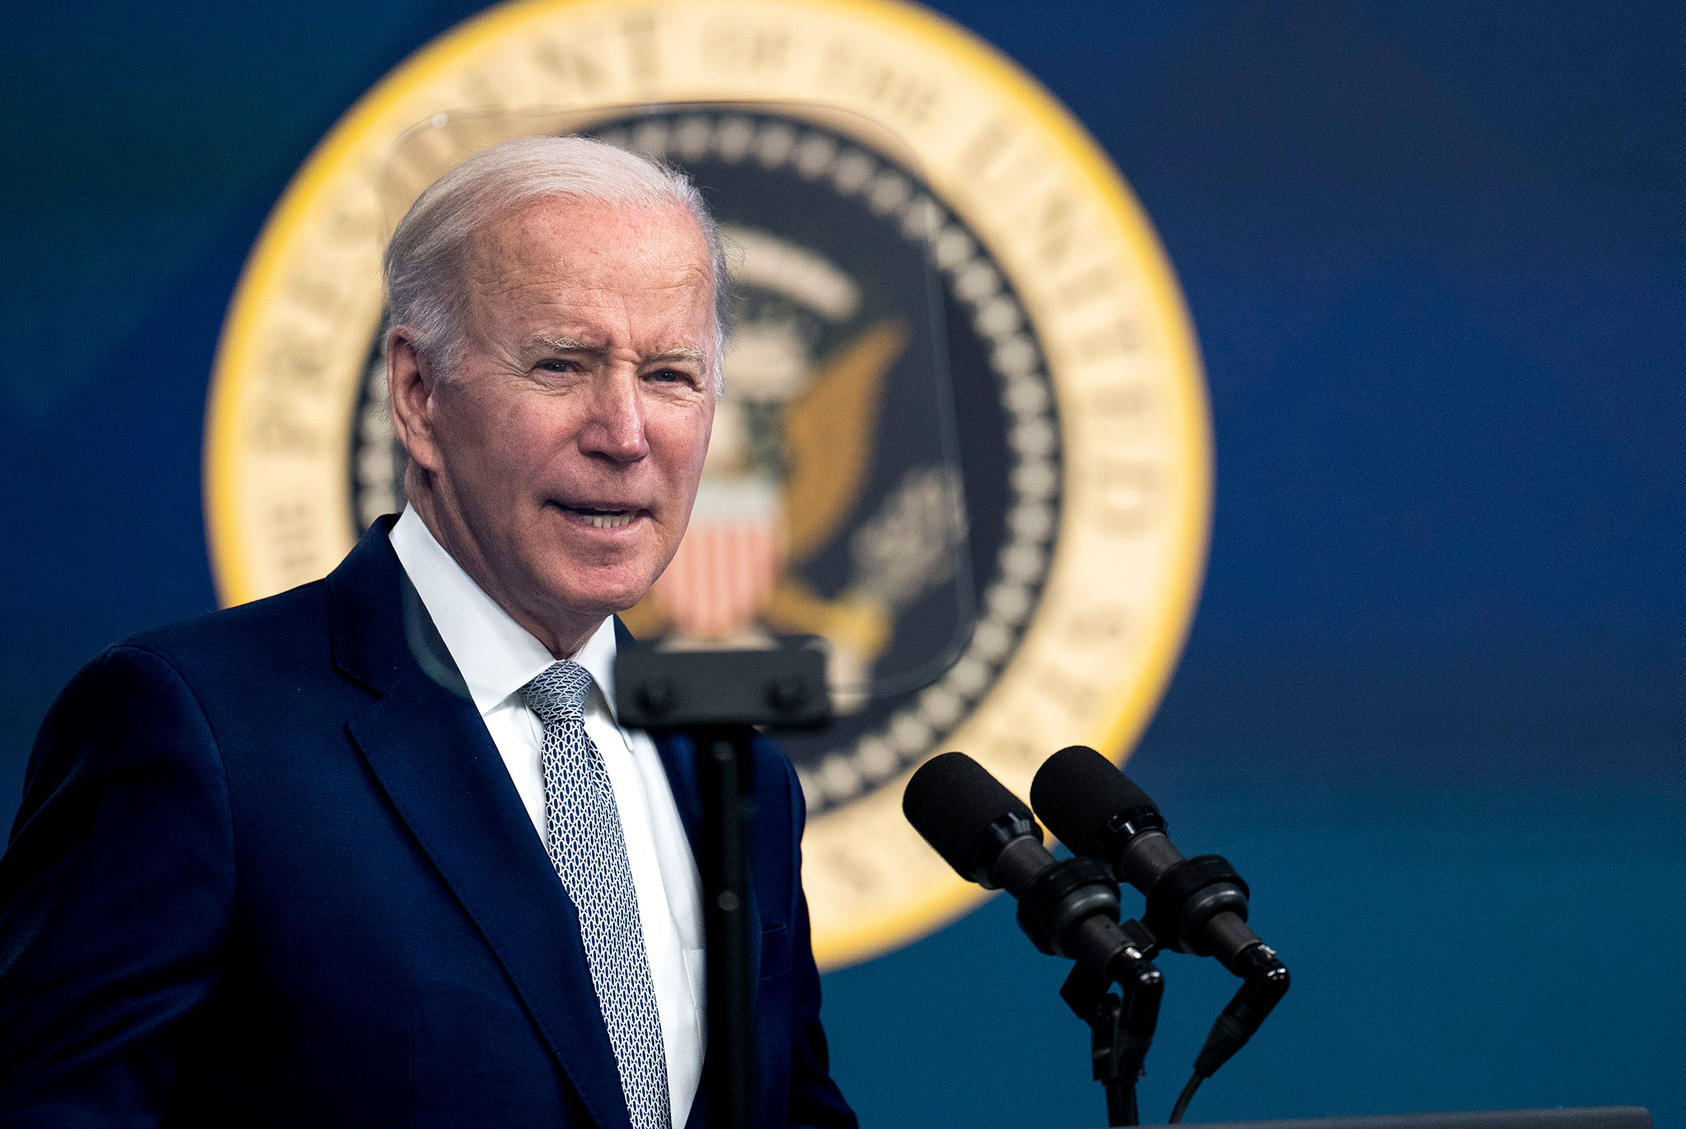 President Joe Biden speaks at the White House in May. His May 31 op-ed essay in the New York Times summarized U.S. goals and methods for ending the Russian invasion of Ukraine. (Doug Mills/The New York Times)